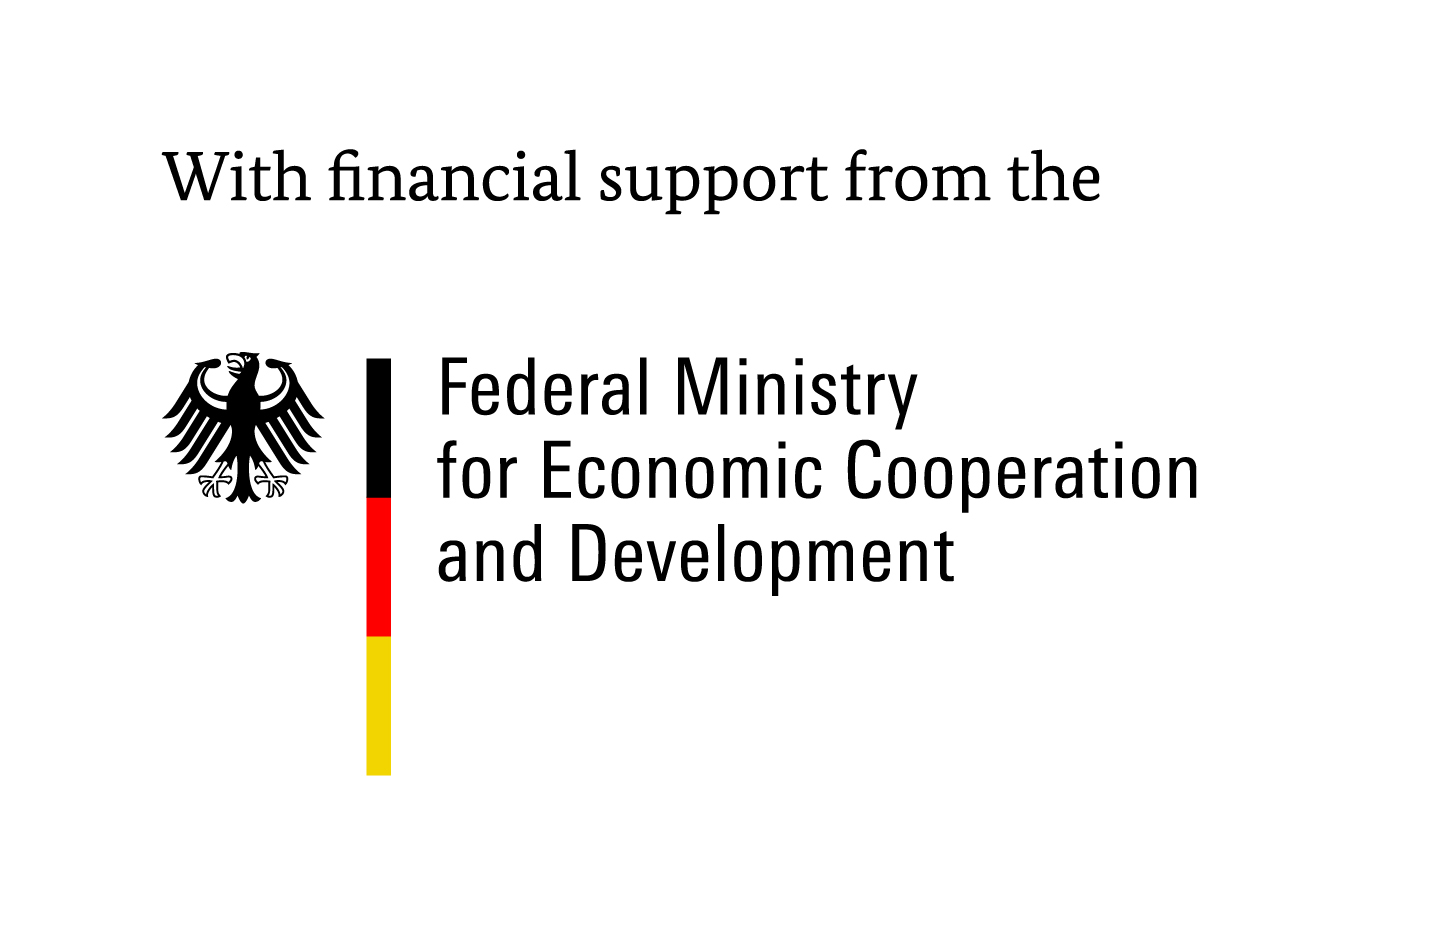 Logo: With financial support from the Federal Ministry for Economic Cooperation and Development